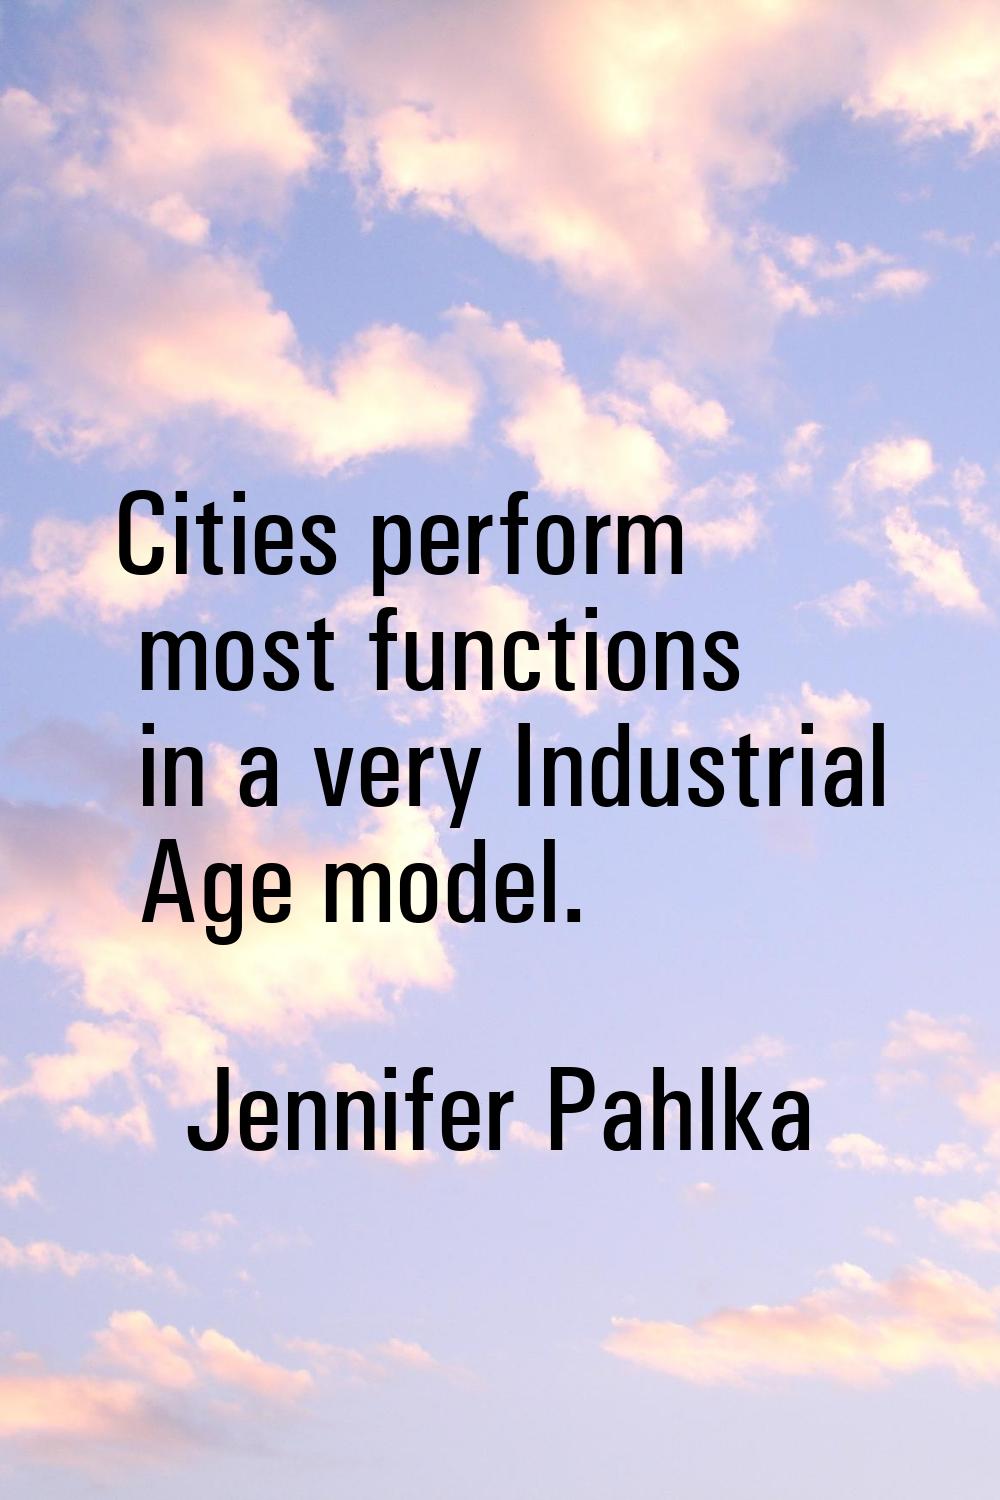 Cities perform most functions in a very Industrial Age model.